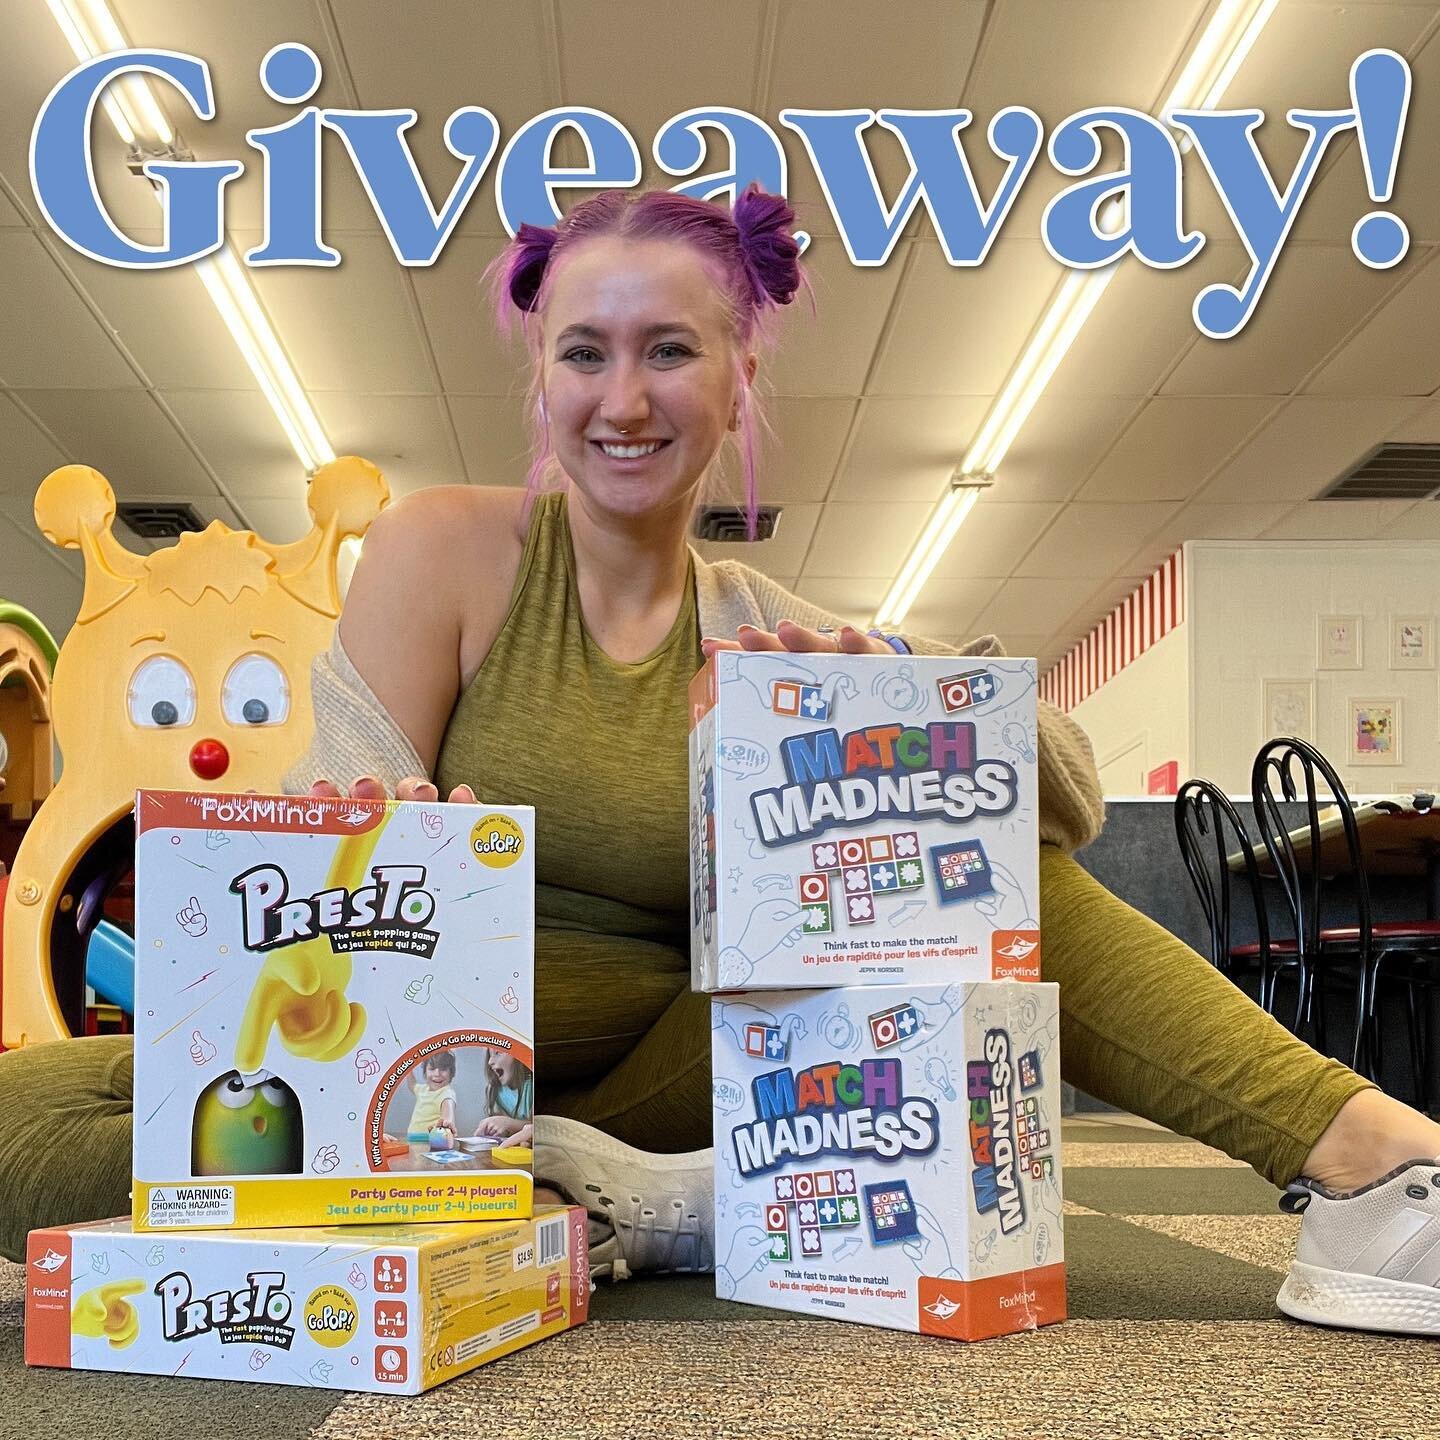 💫GIVEAWAY TIME💫
.
I had so much fun playing Presto and Match Madness this month, I teamed up with my friends at @foxmindgames to do a fun GIVEAWAY! 🥳I will choose FOUR winner, 2️⃣ will get Match Madness and 2️⃣ will get Presto 🤩
.
How to win:
1. 